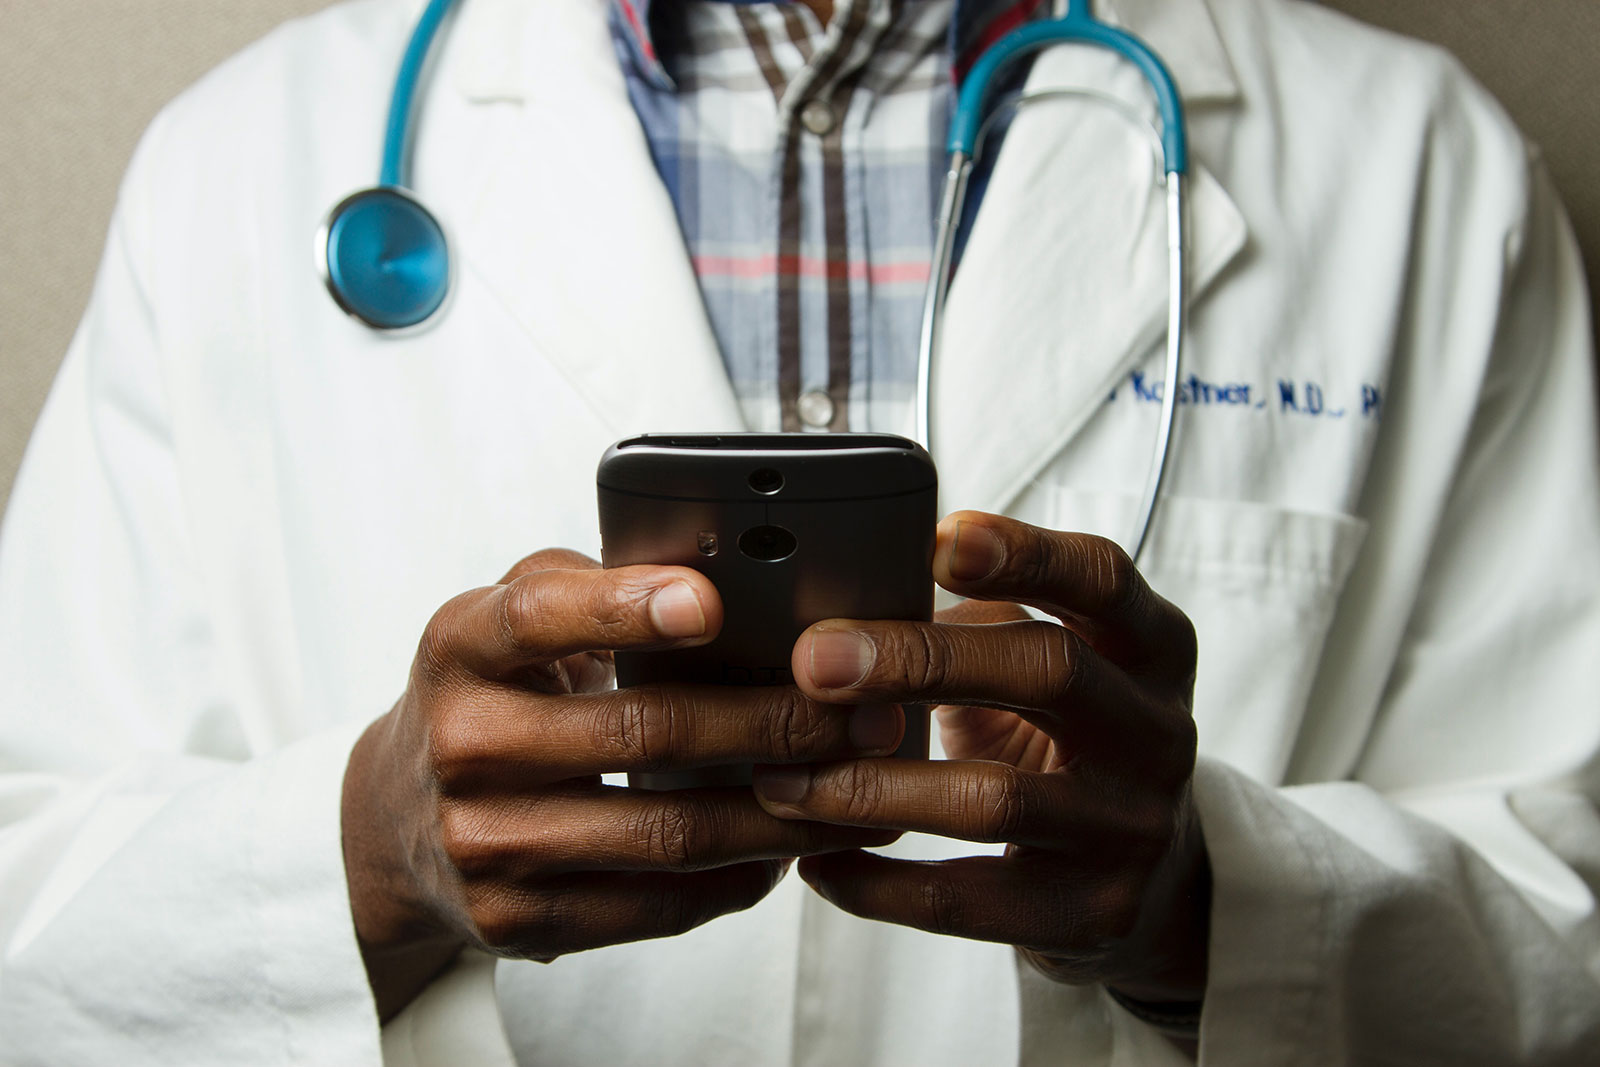 Closeup of the hands of a Black healthcare professional holding a mobile phone and wearing a white coat and stethoscope